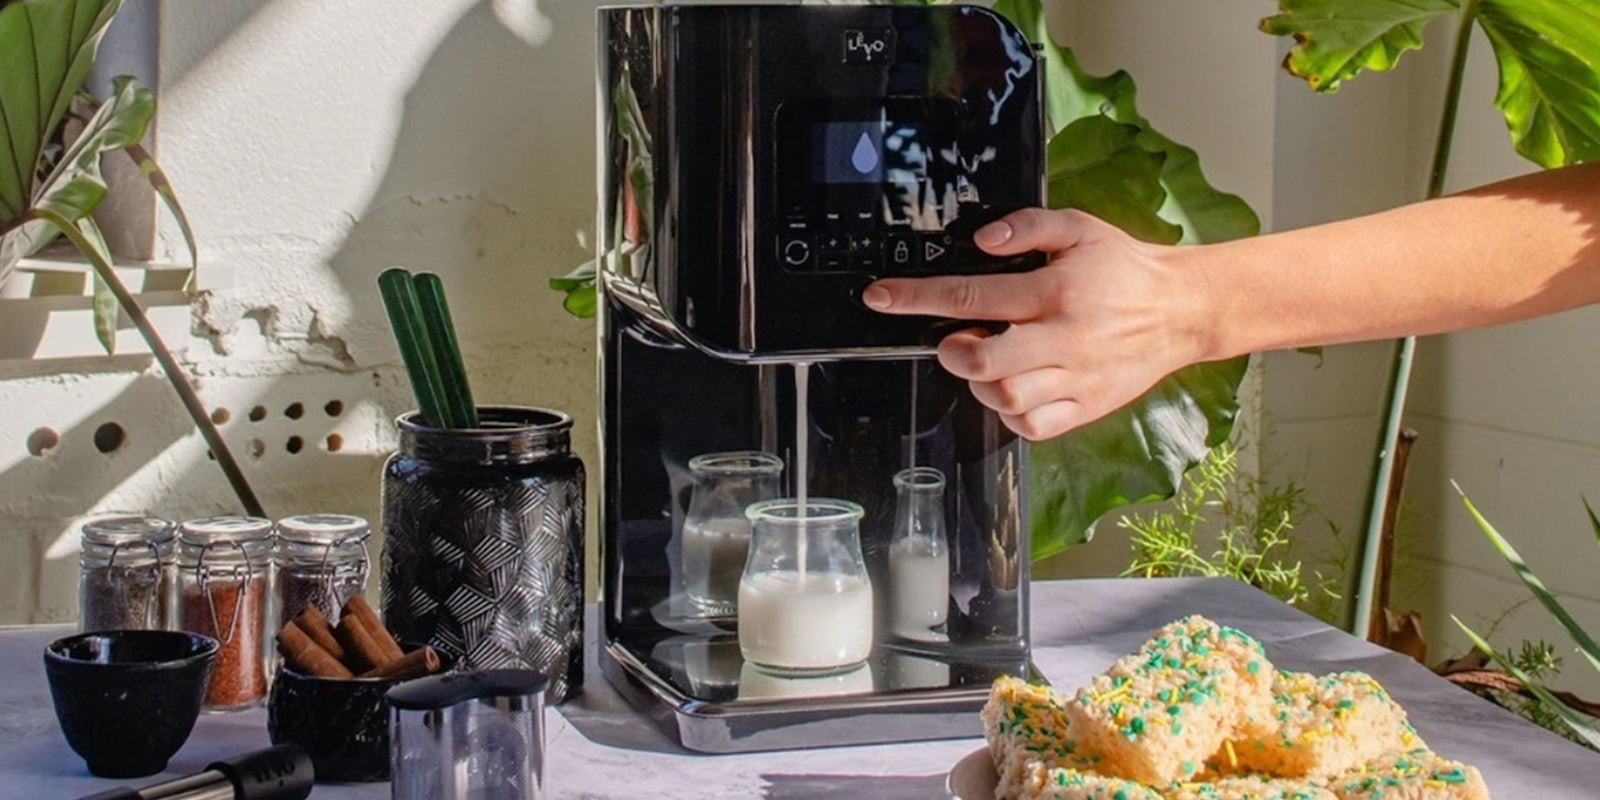 LĒVO II cannabutter machine is busy dispensing infused milk on a table next to the device's accessories, rice krispy treats, and a plant in the background.